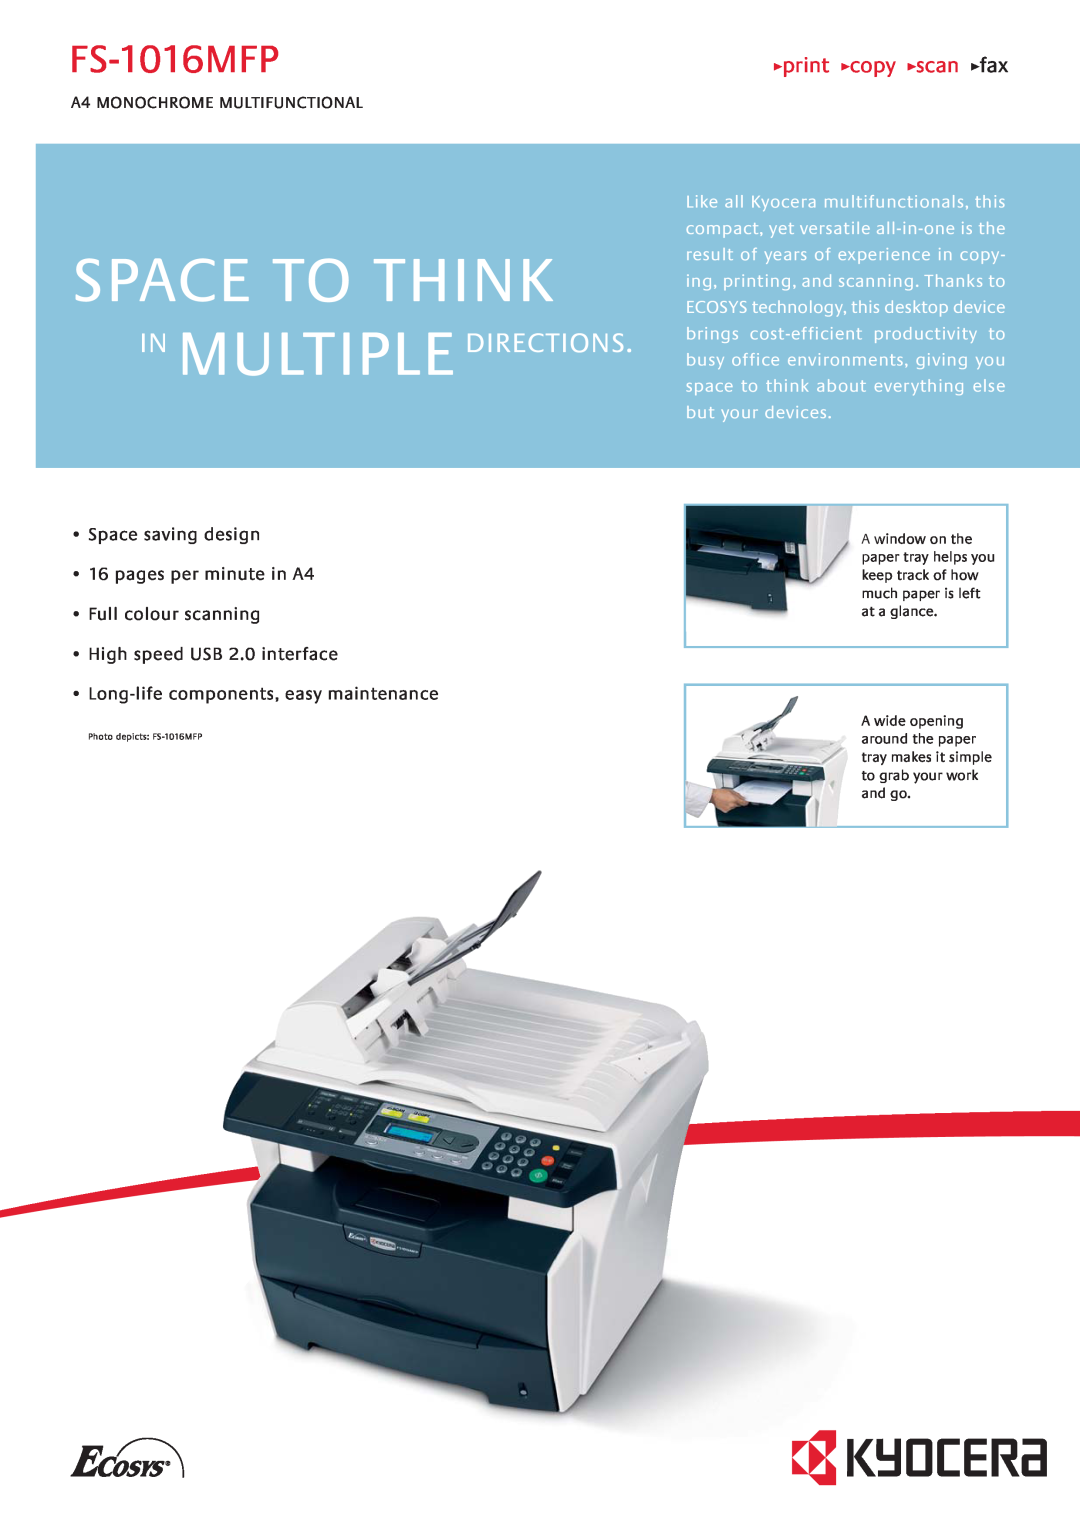 Kyocera FS-1016MFP manual Space To Think, In Multipledirections, print copy scan fax 